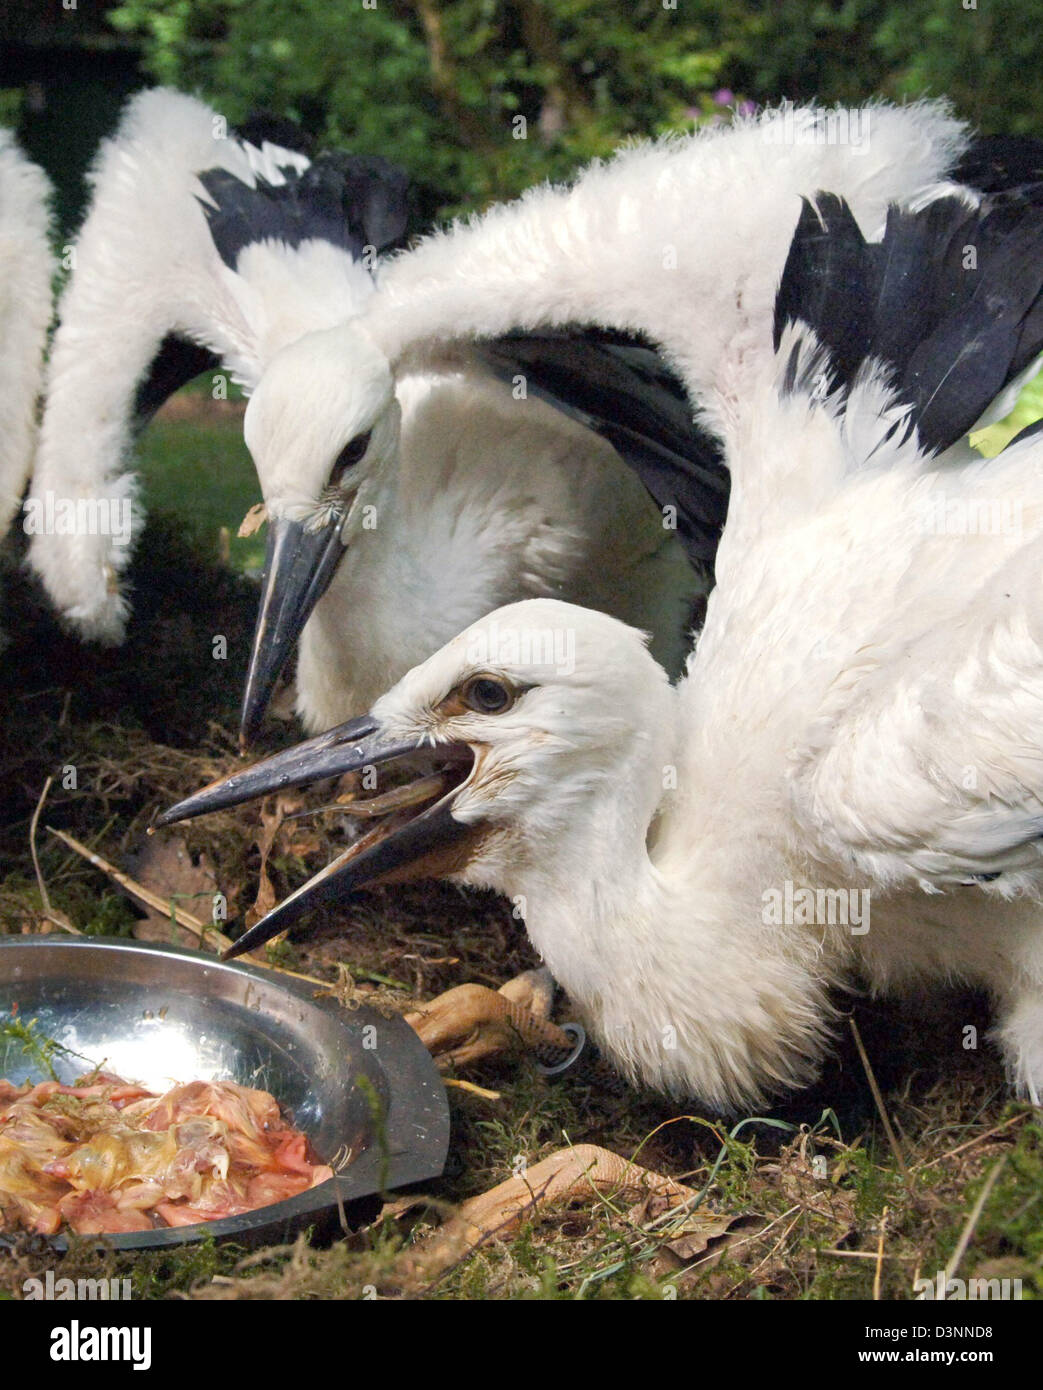 Four-weeks old white stork's offspring shows some appetite in wild animal park Eeholt in Grossenaspe, Germany, Friday, 09 June 2006. Already 17 storks were born in the wild animal park this year. In August the grownup migrant birds will head for their long journey to Africa where they will stay for the winter months. Photo: Wulf Pfeiffer Stock Photo